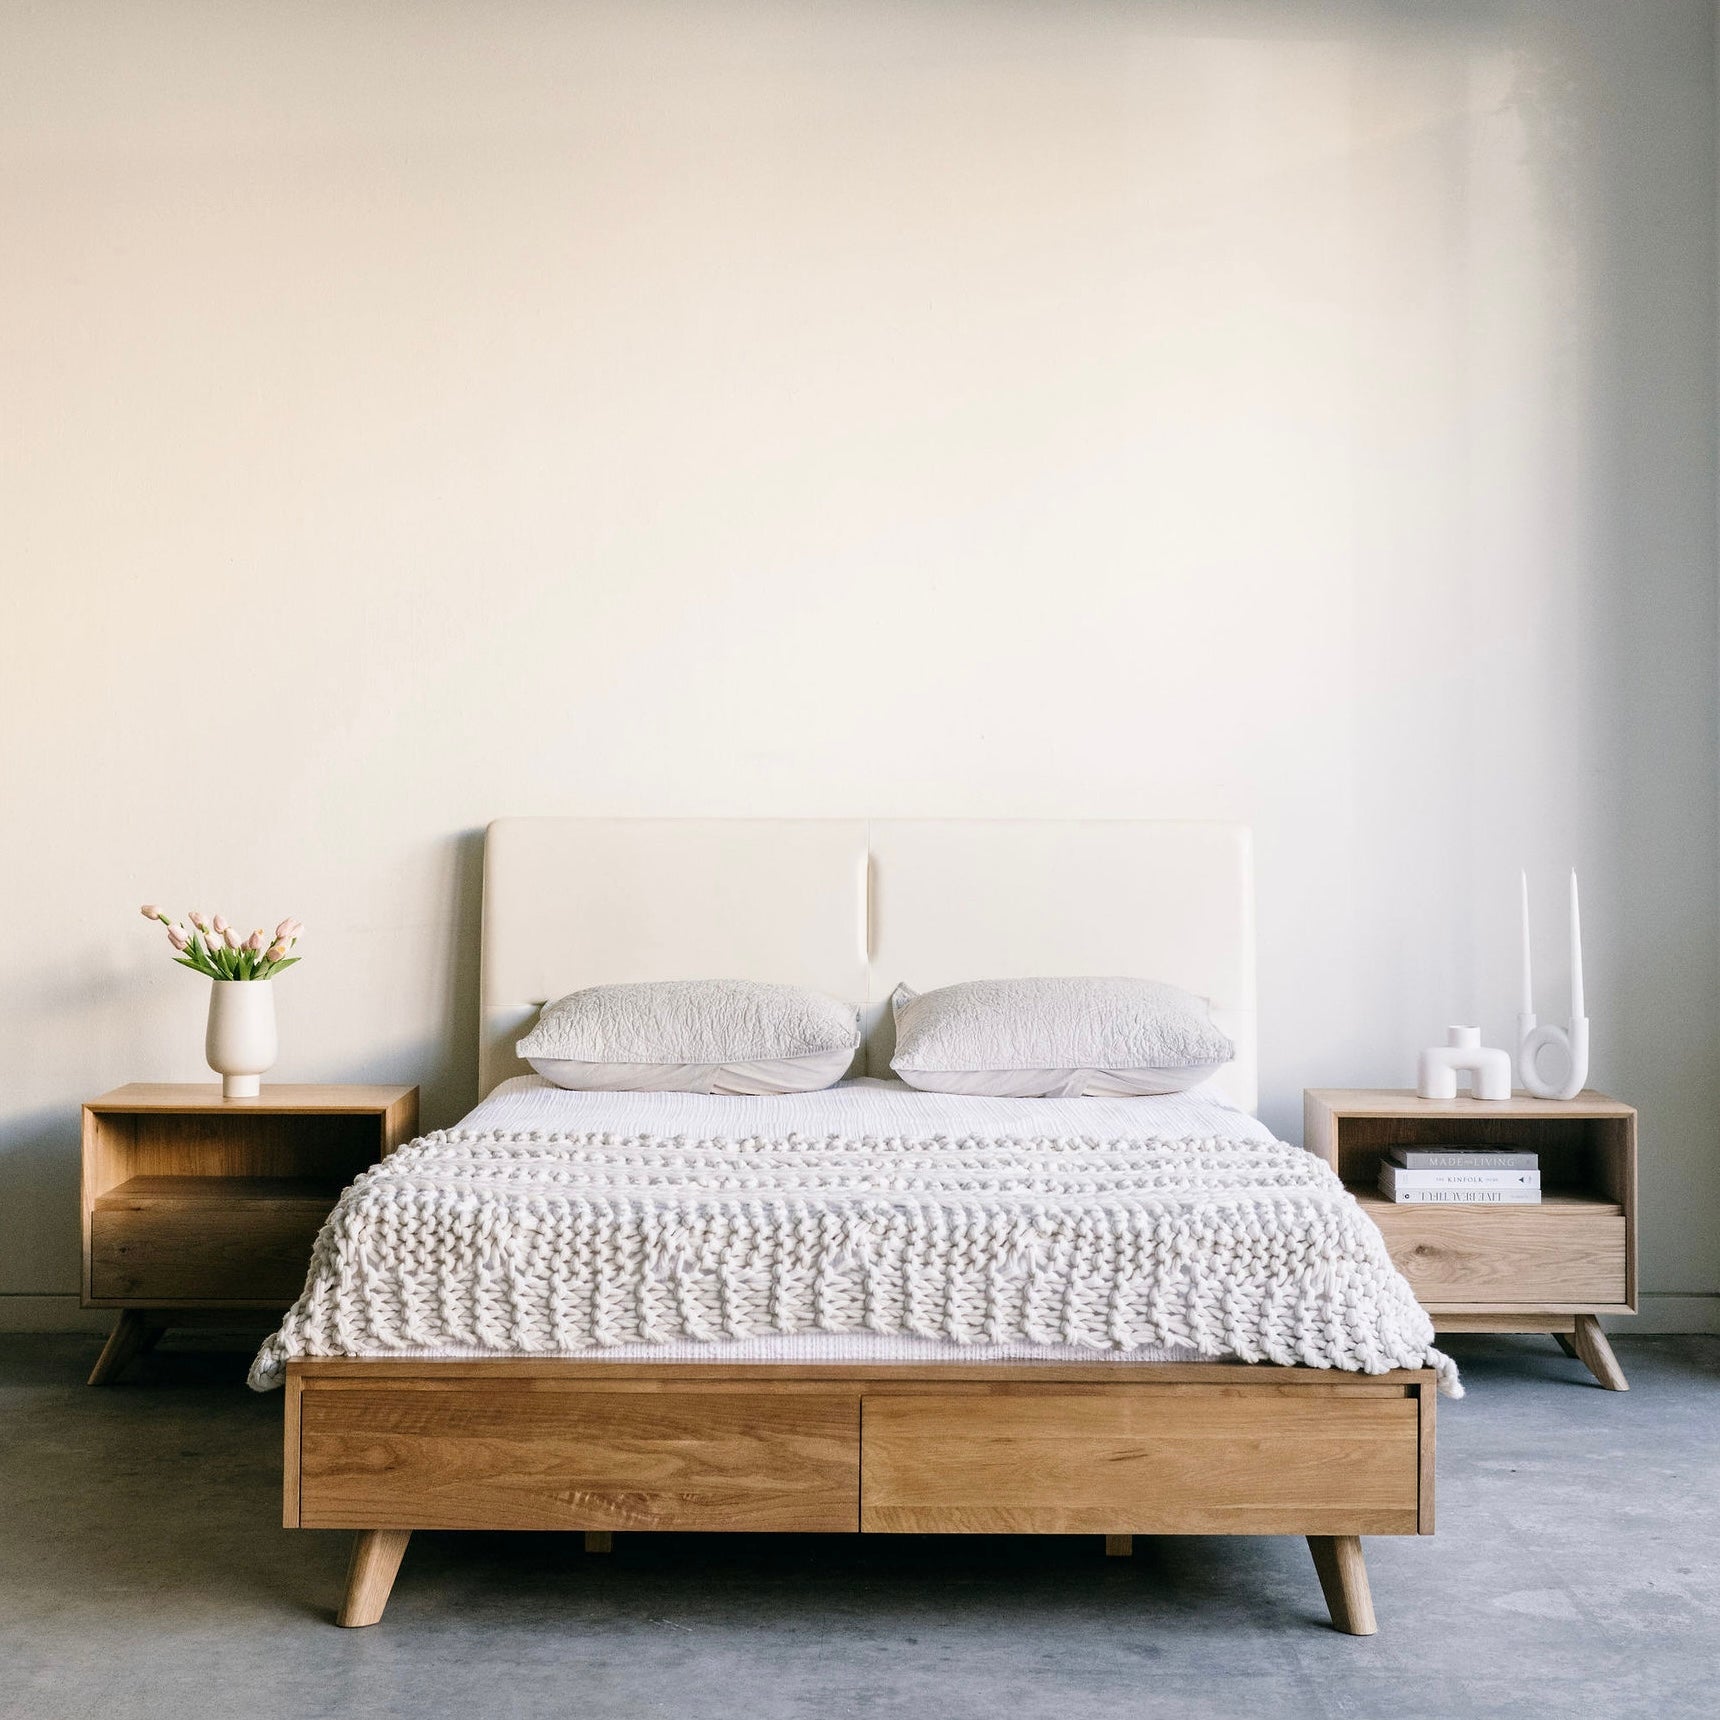 Mim Concept  best Modern furniture stores in Toronto, Ottawa and Mississauga to sell modern contemporary bedroom furniture and condo furniture. Italian leather headboard bed Low profile platform storage bed solid oak wood modern organic